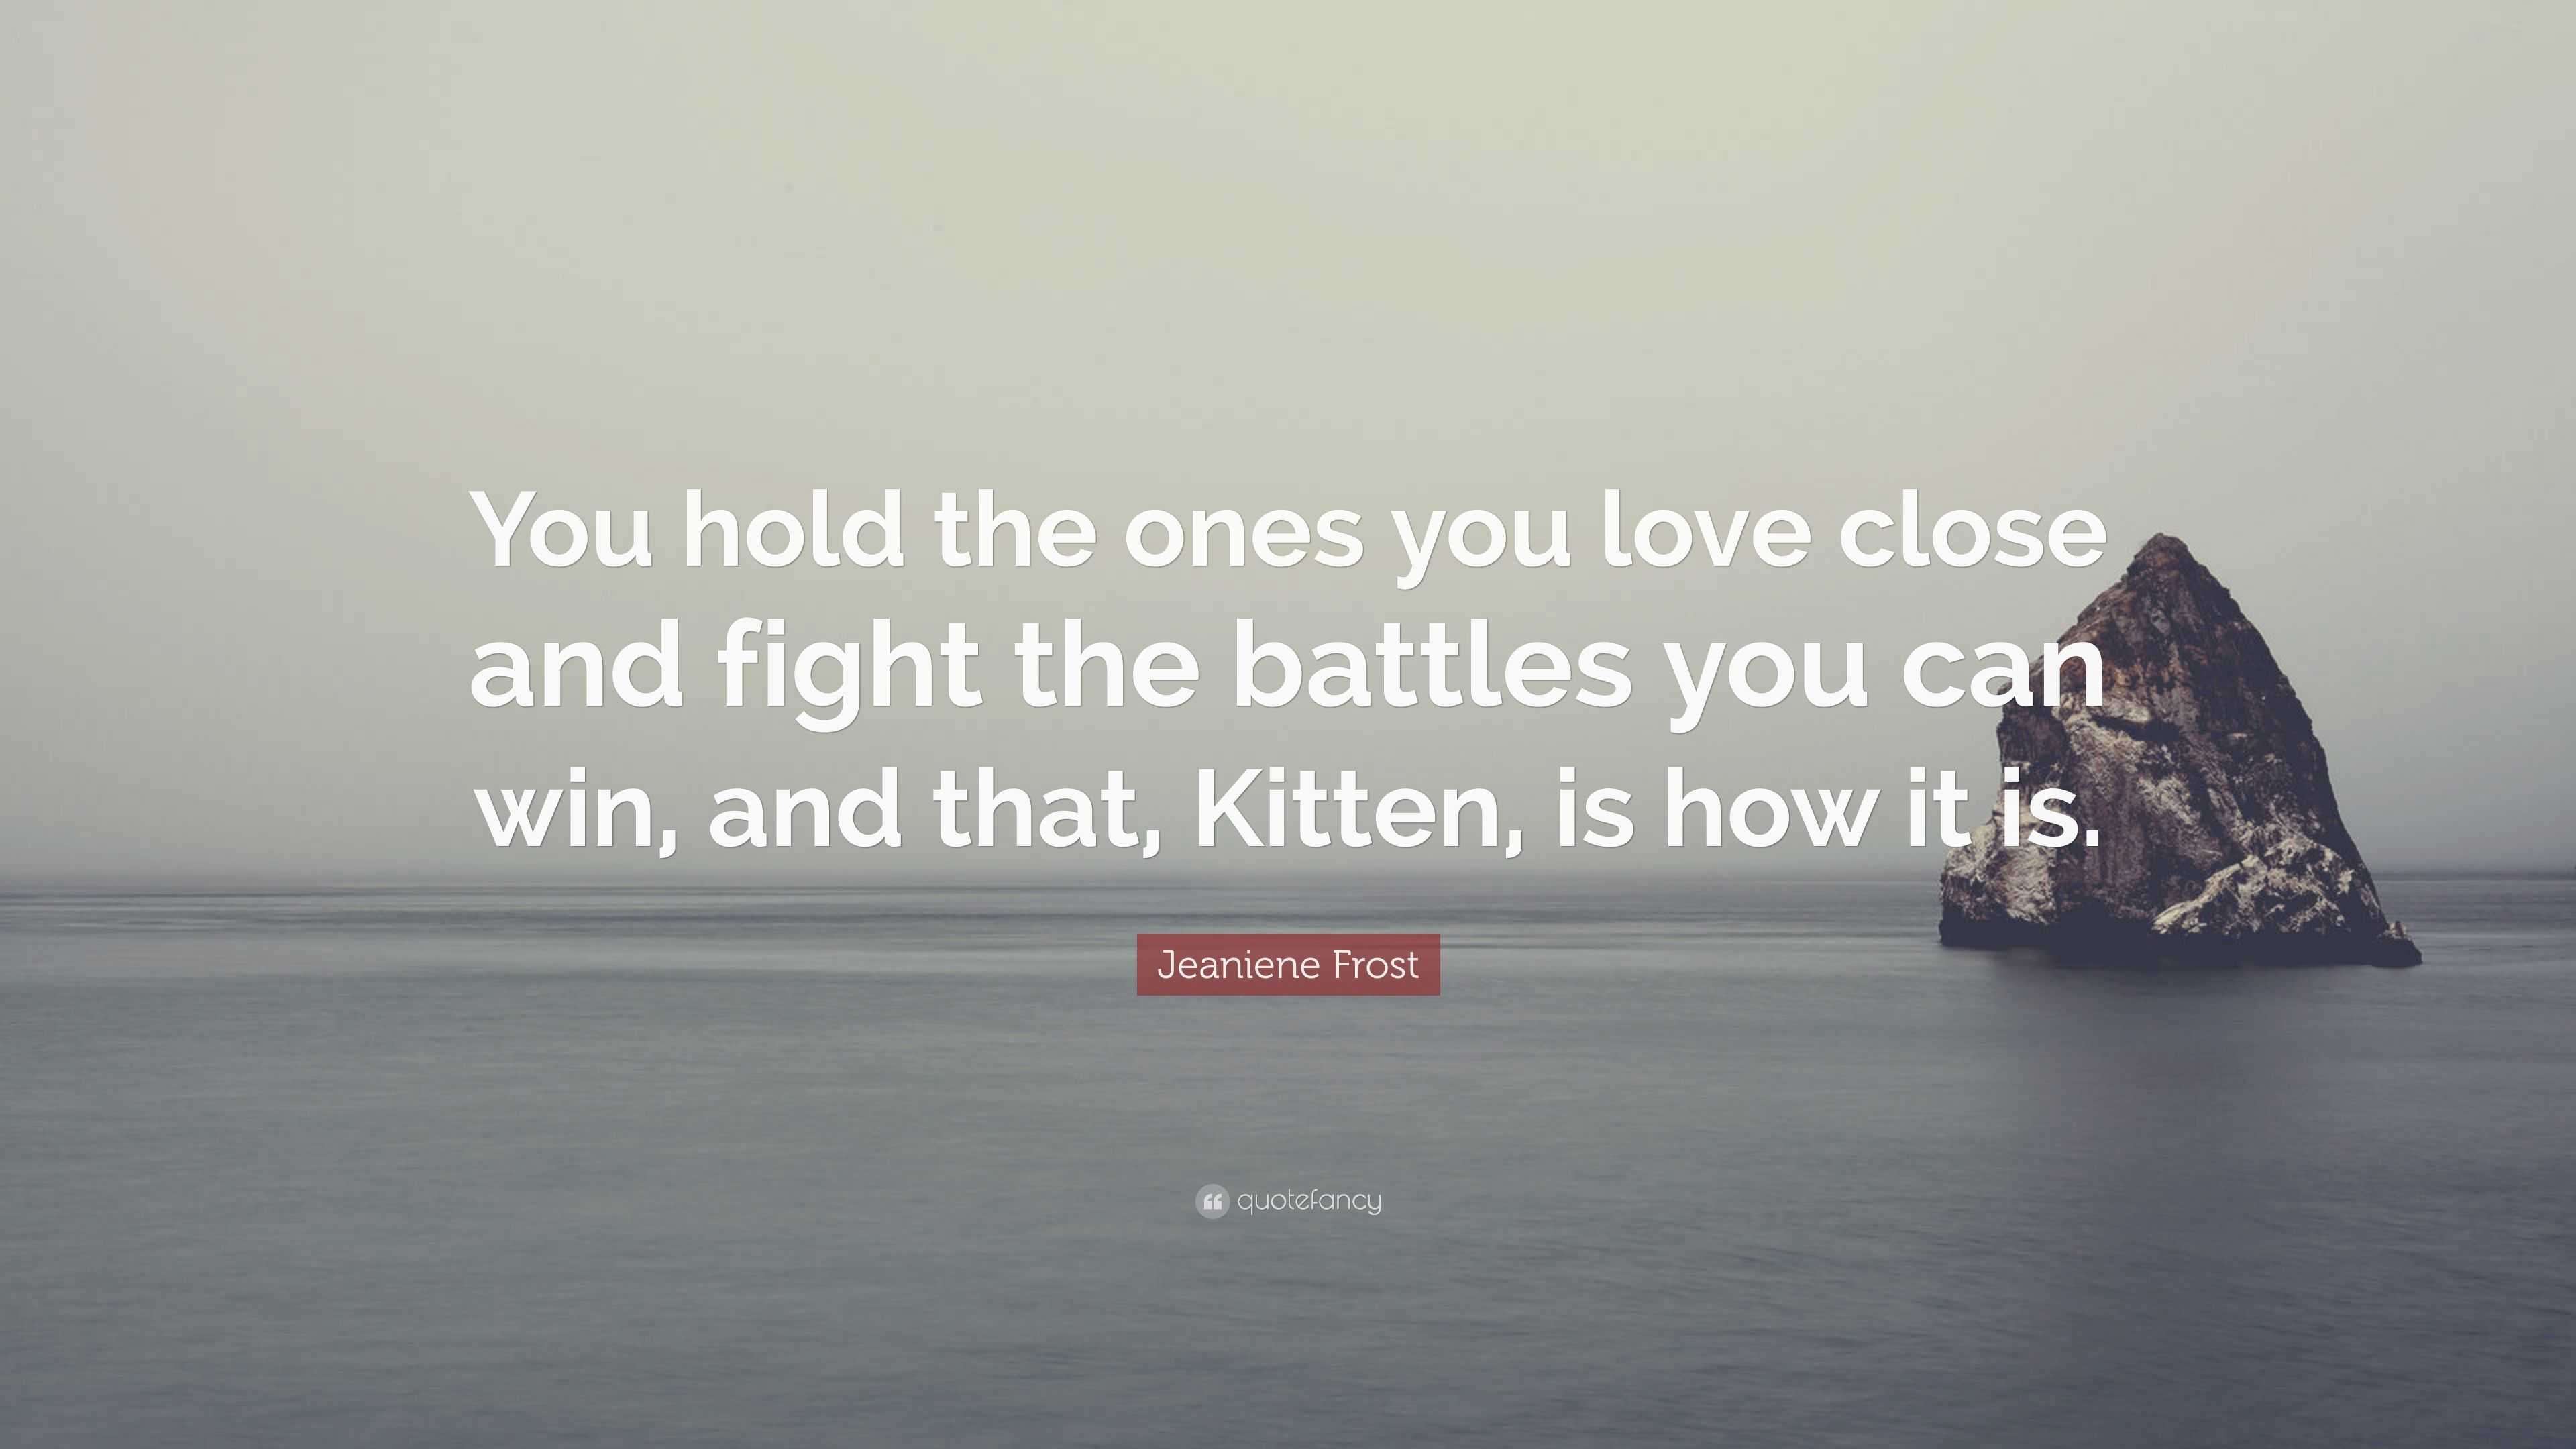 Jeaniene Frost Quote: “You hold the ones you love close and fight the ...